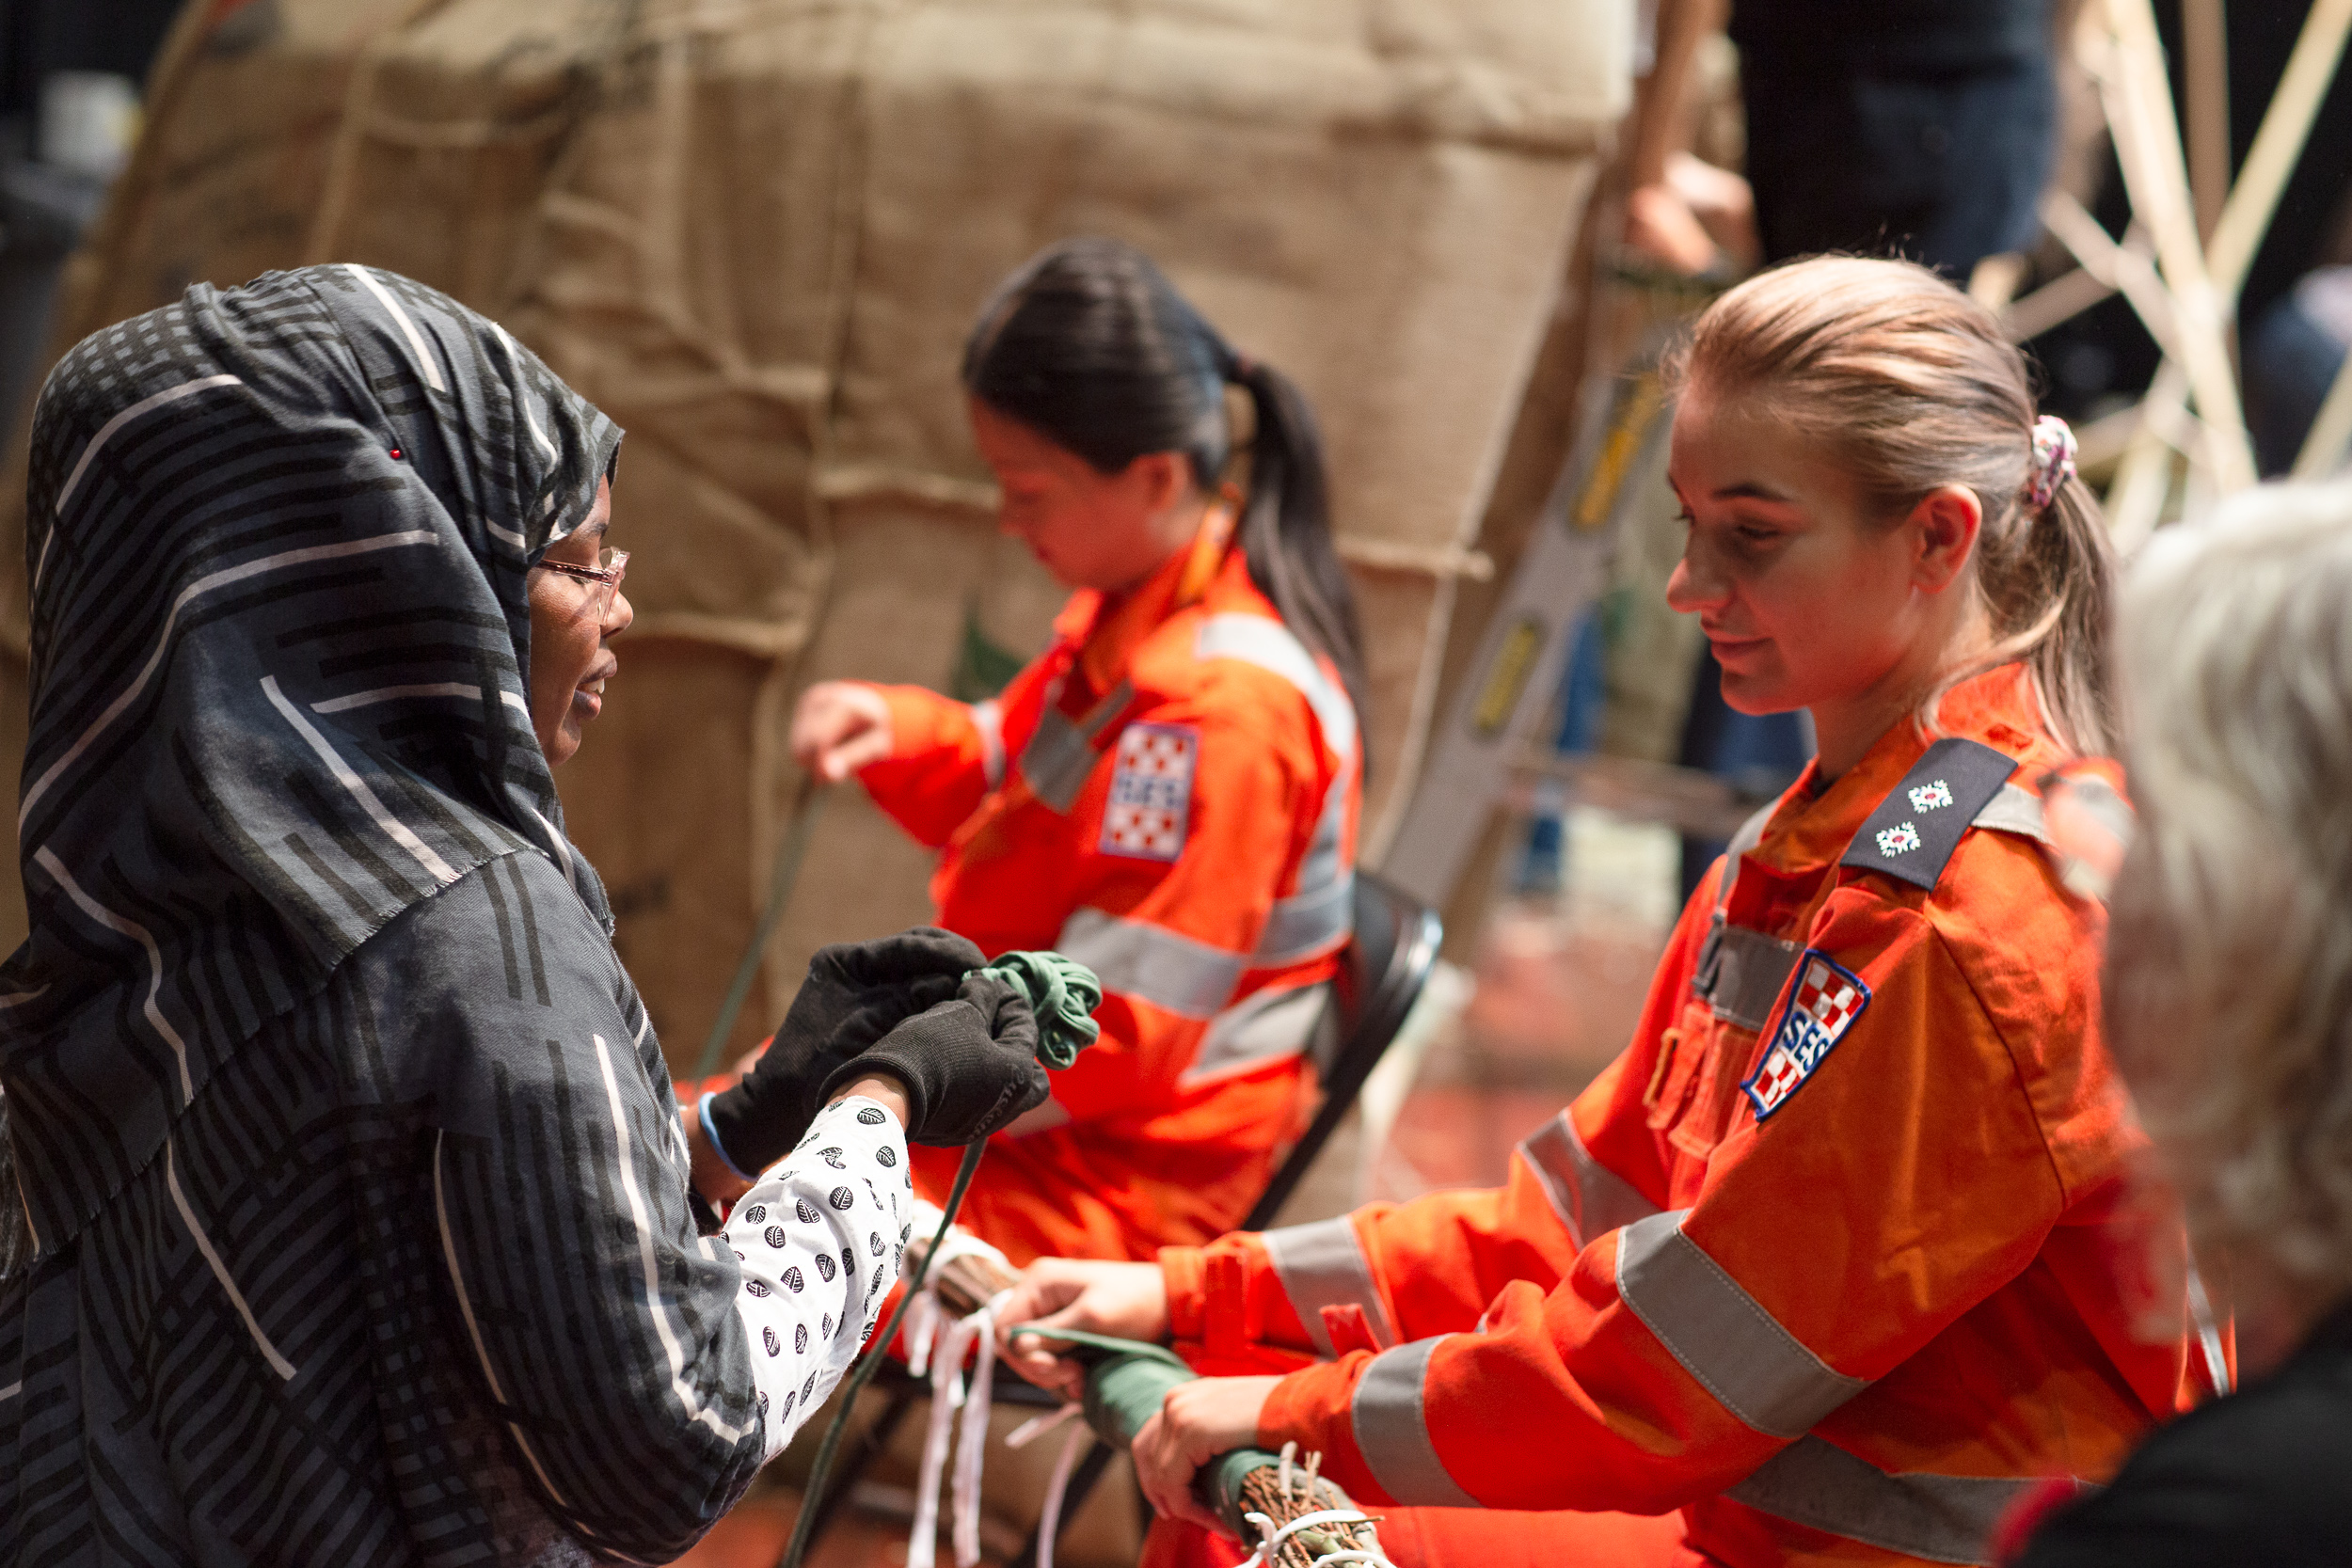 Refuge 2021 Documentary - Portage: Shelter2Camp by Jen Rae, photo by Bryony Jackson - Two emergency services people wearing high-vis orange uniforms. One with a blond ponytail is holding a rope structure with a woman in a black headscarf